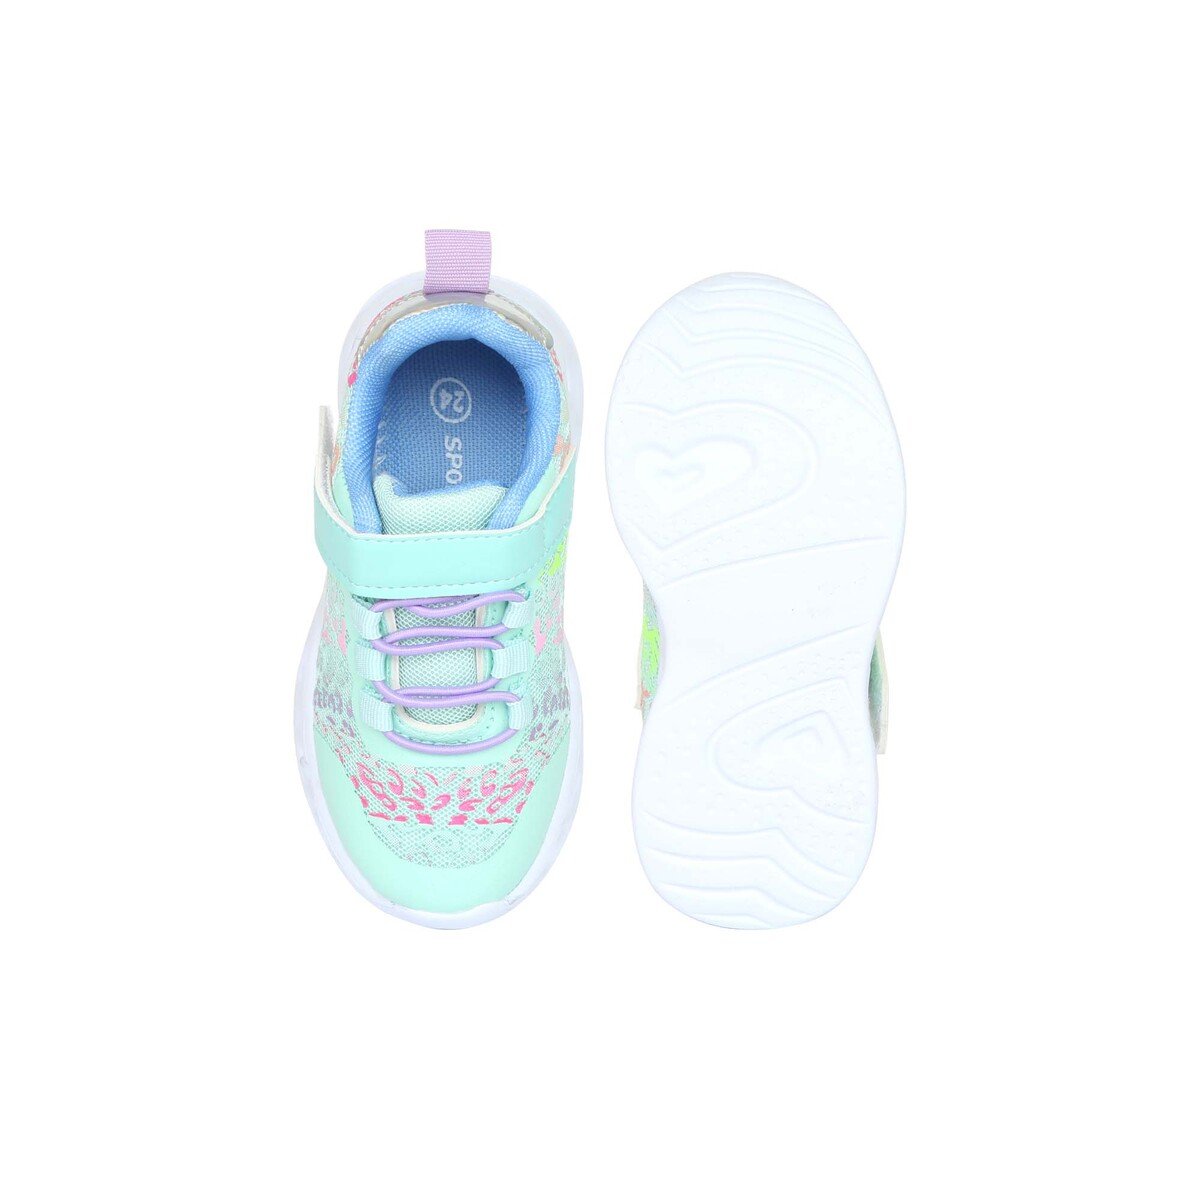 Sports Inc Baby Girl Shoes with Light KL85703 Blue, 25